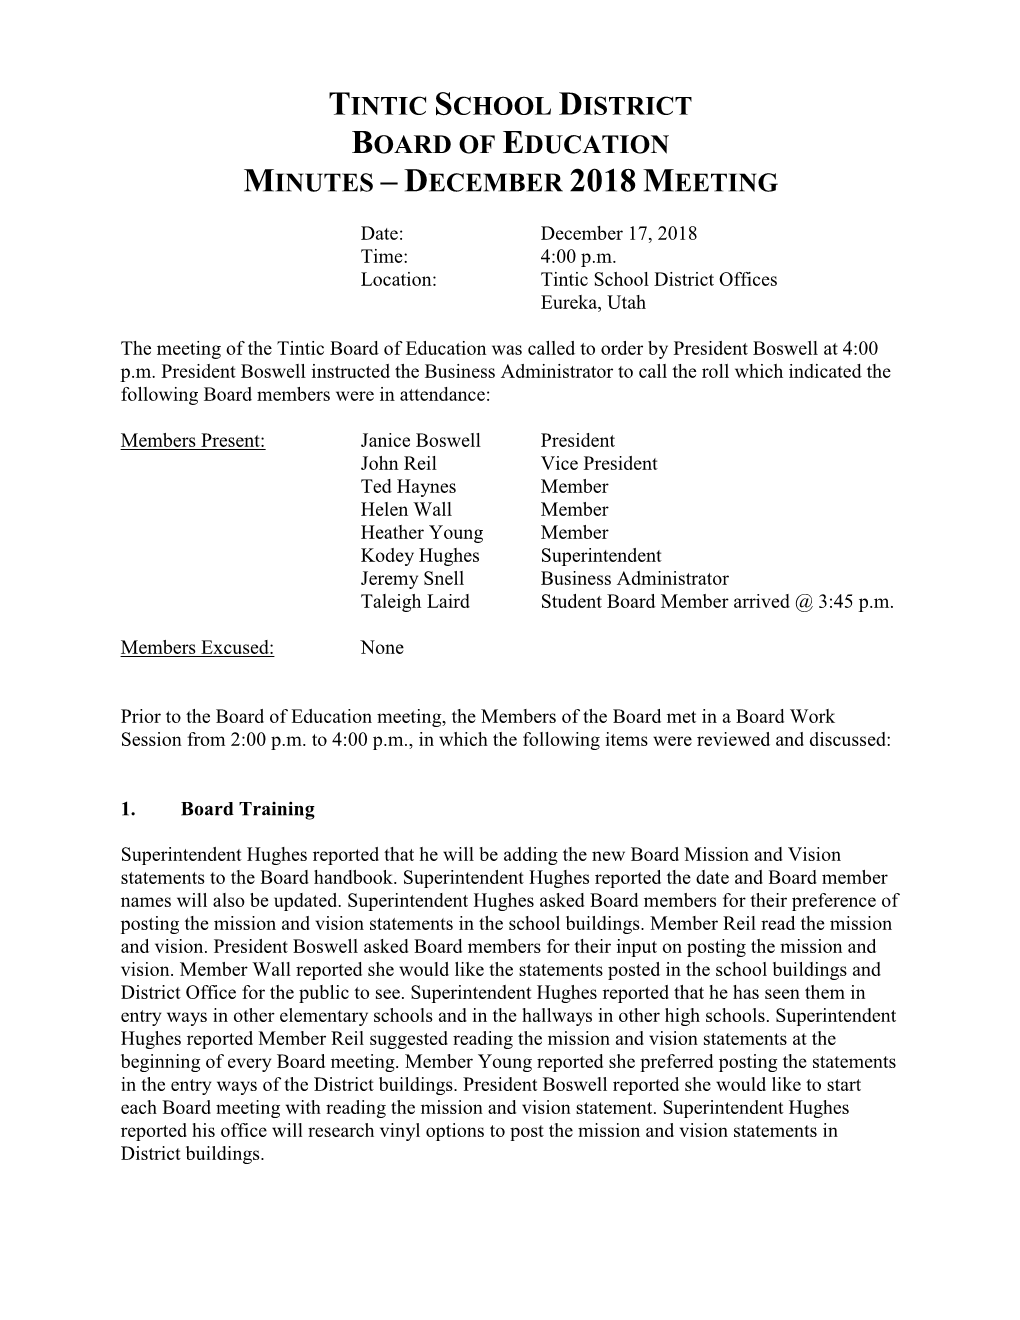 Tintic School District Board of Education Minutes – December 2018 Meeting